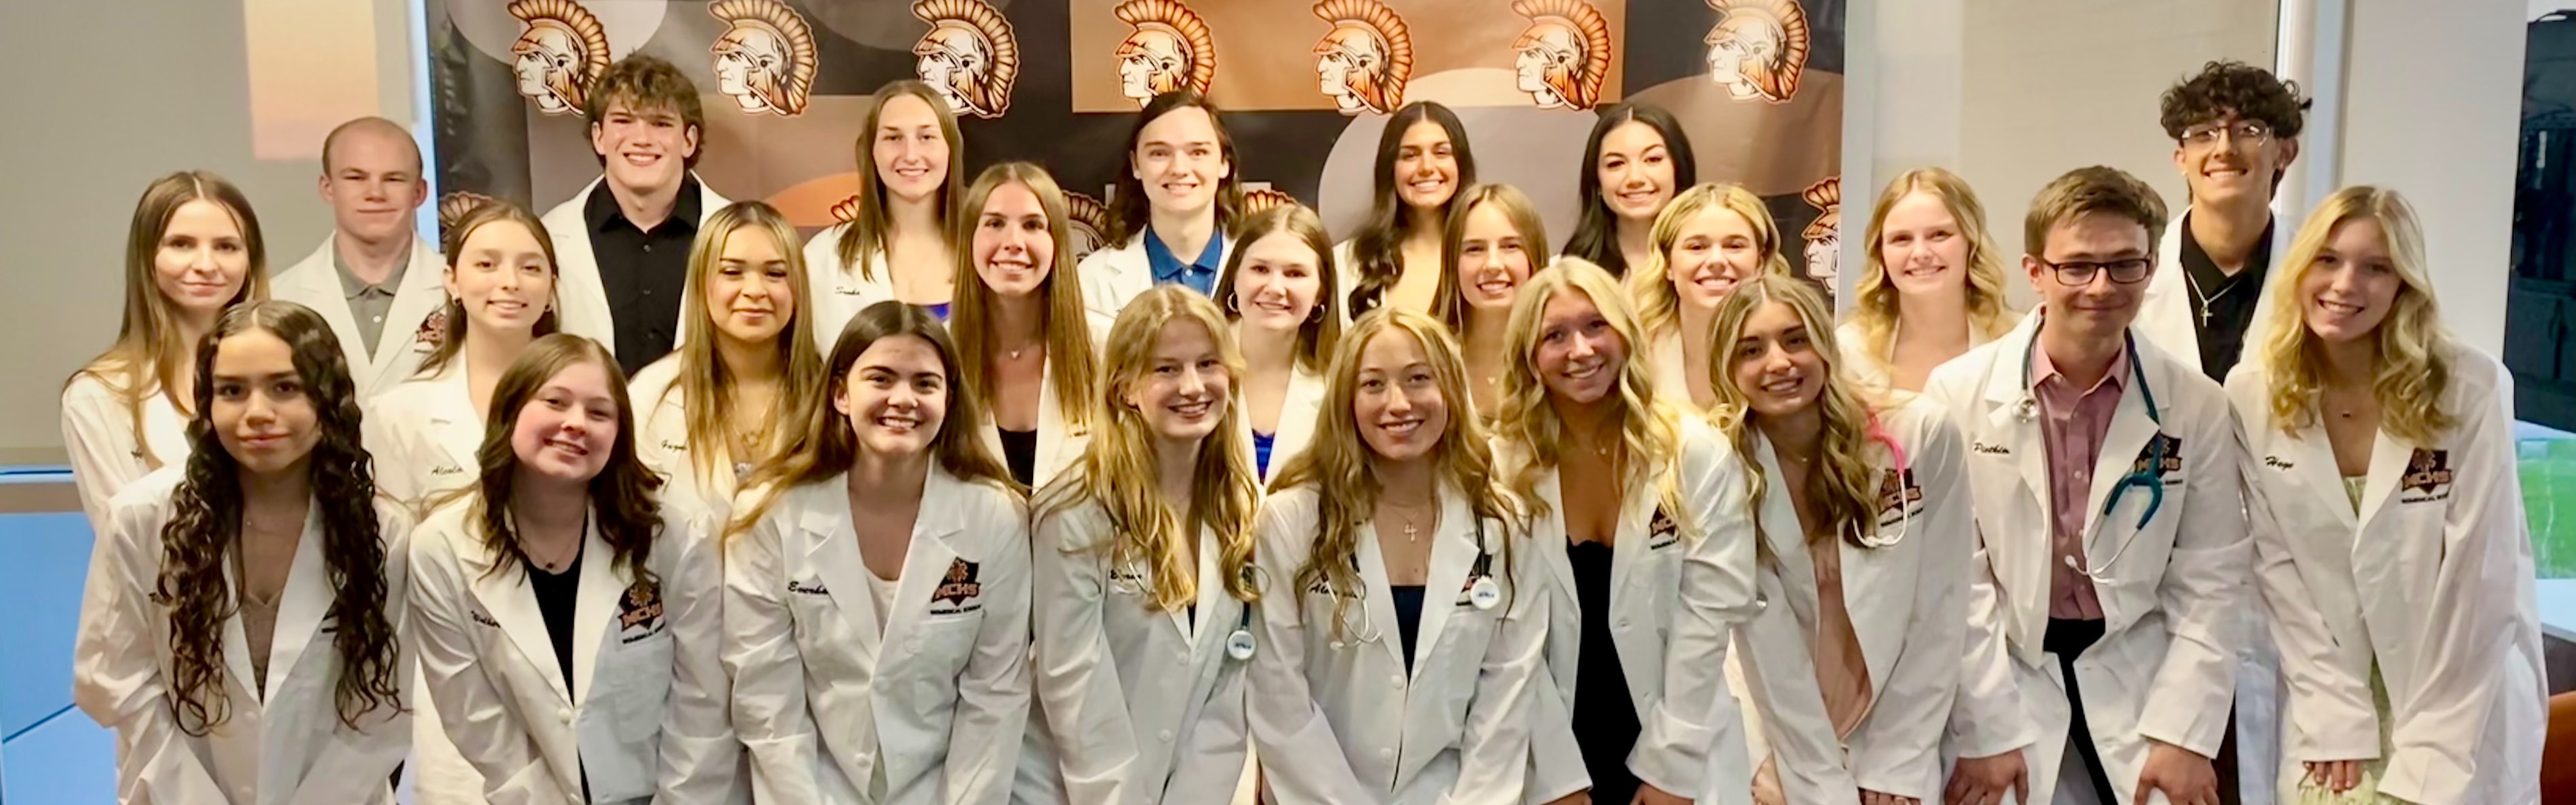 Students in white coats at white coat ceremony